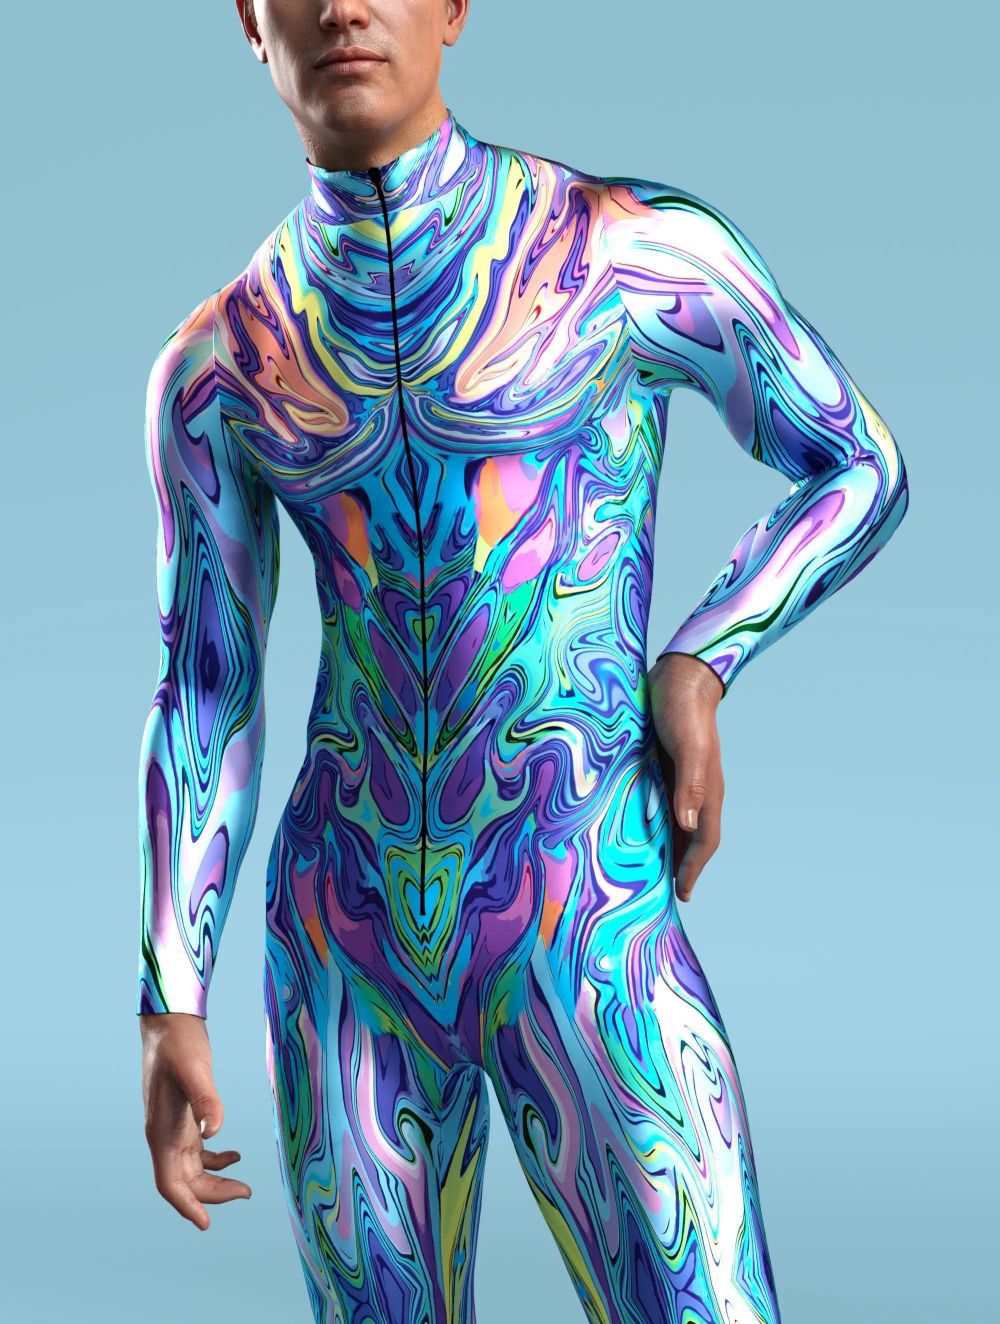 A person is wearing the Maramalive™ Halloween Tights 3D Digital Printing Cos One-piece Play Costume with a swirling, abstract pattern on a light blue background. The chemical fiber blend adds durability and flexibility, making it perfect for role-playing in game animation.